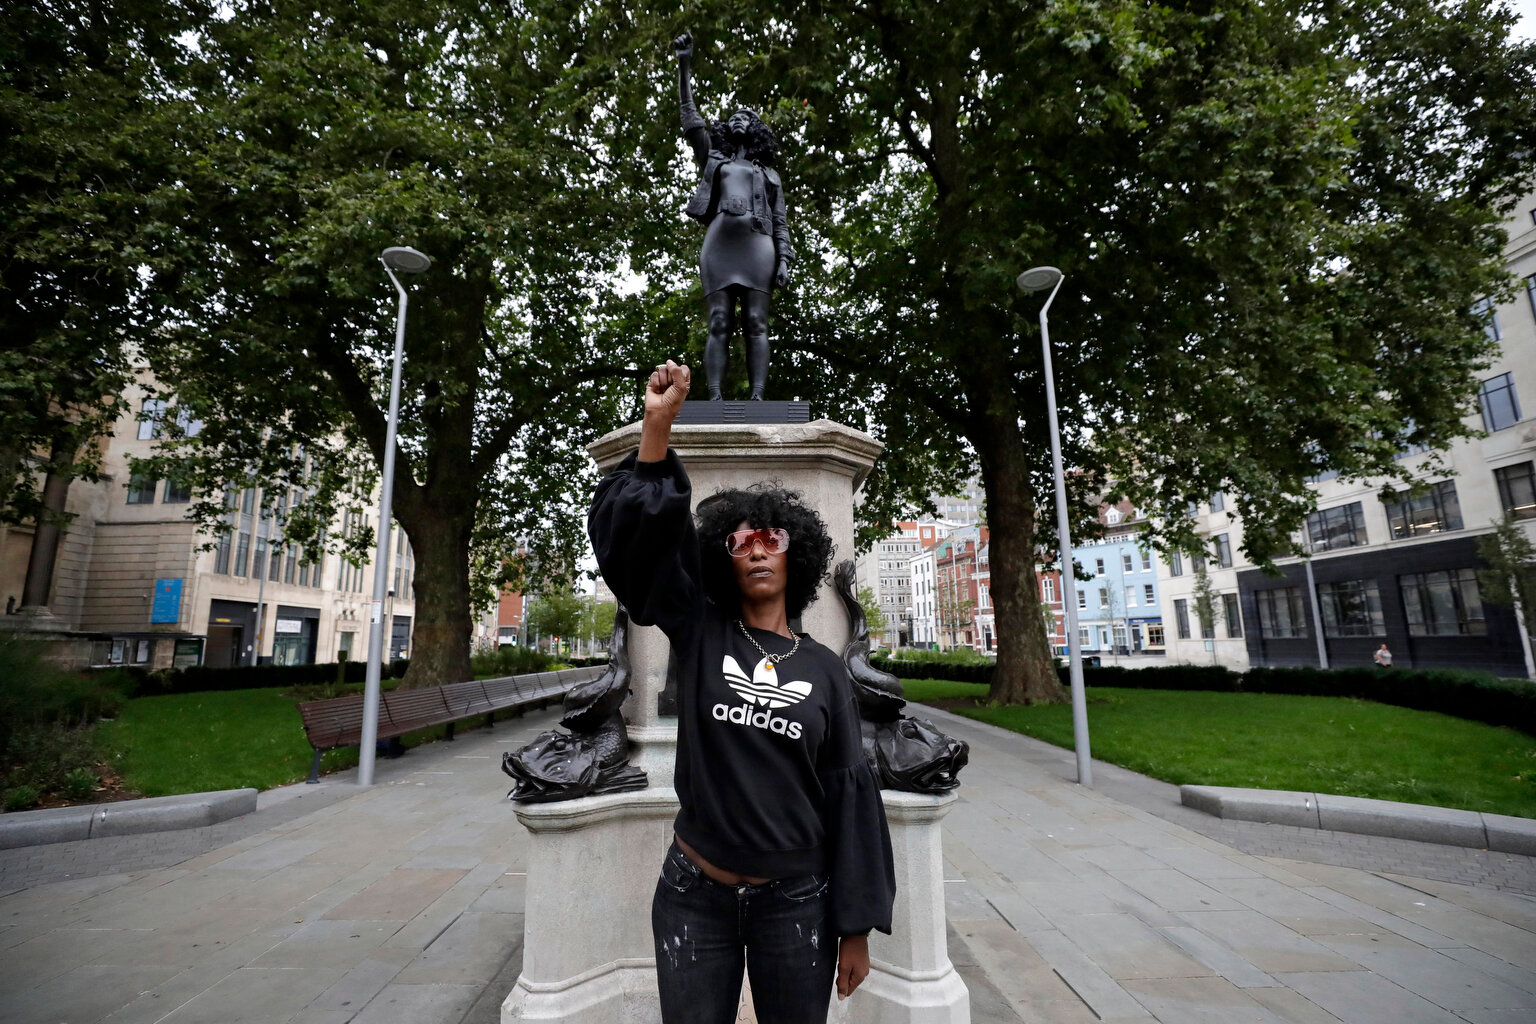  Jen Reid poses for photographs in front of the new black resin and steel statue portraying her, entitled "A Surge of Power (Jen Reid) 2020" by artist Marc Quinn after the statue was put up this morning on the empty plinth of the toppled statue of 17